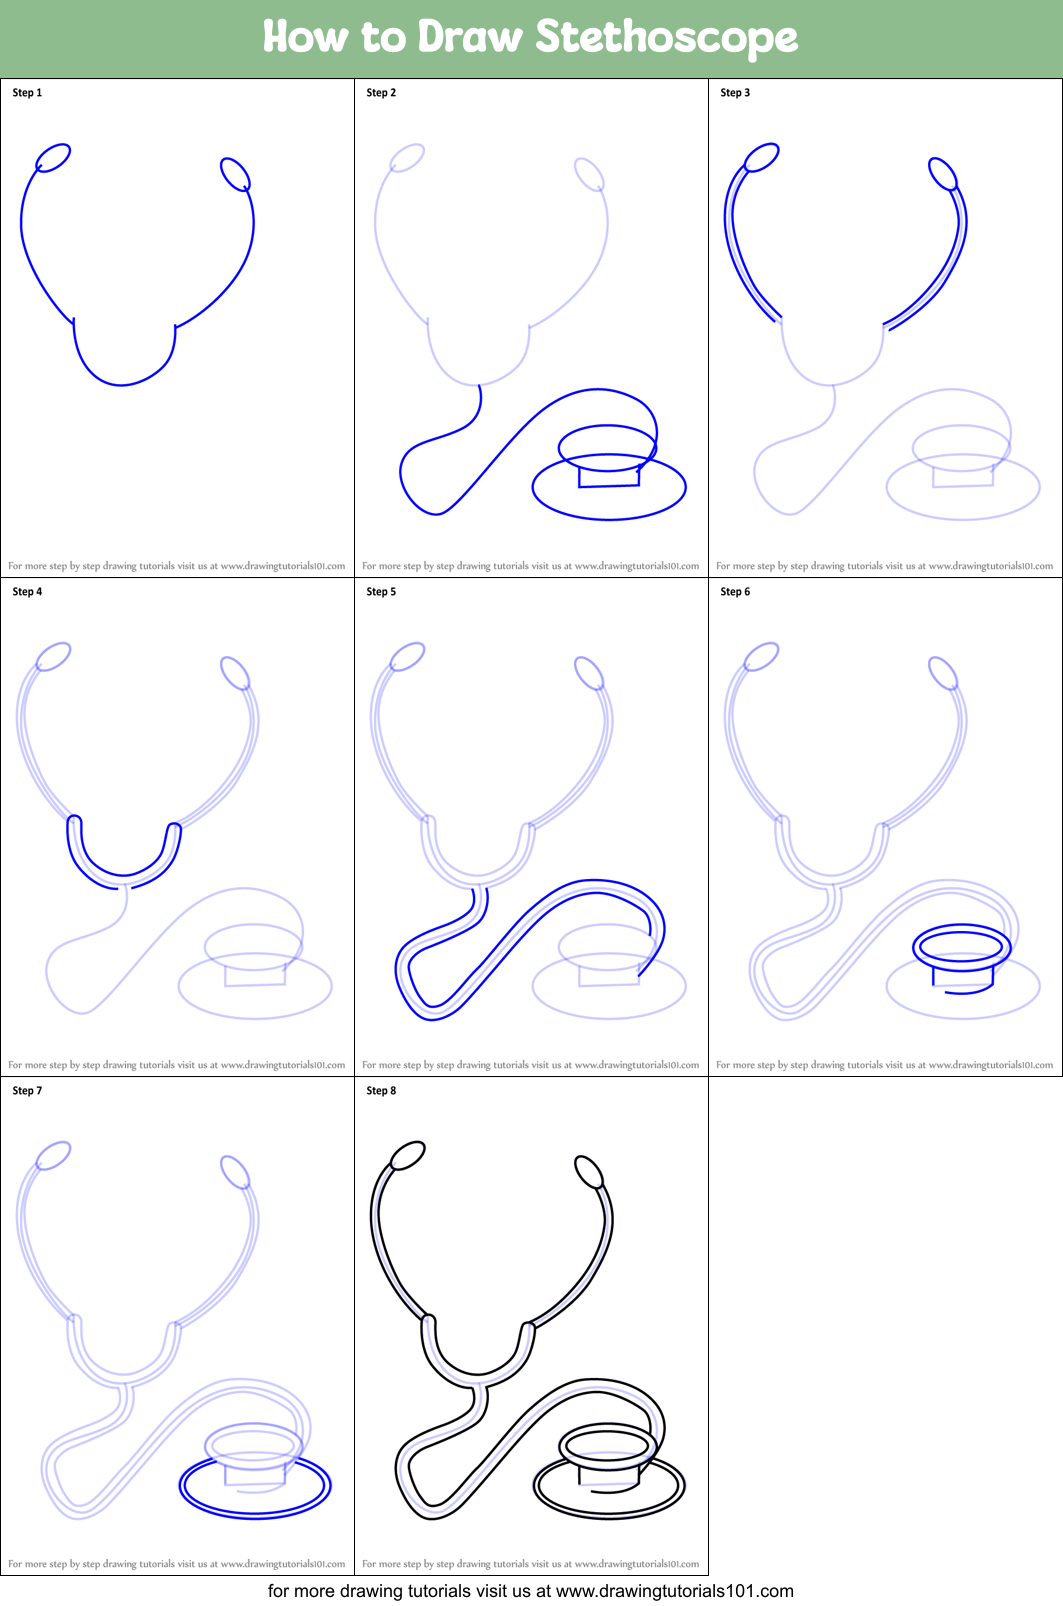 How to Draw Stethoscope printable step by step drawing sheet